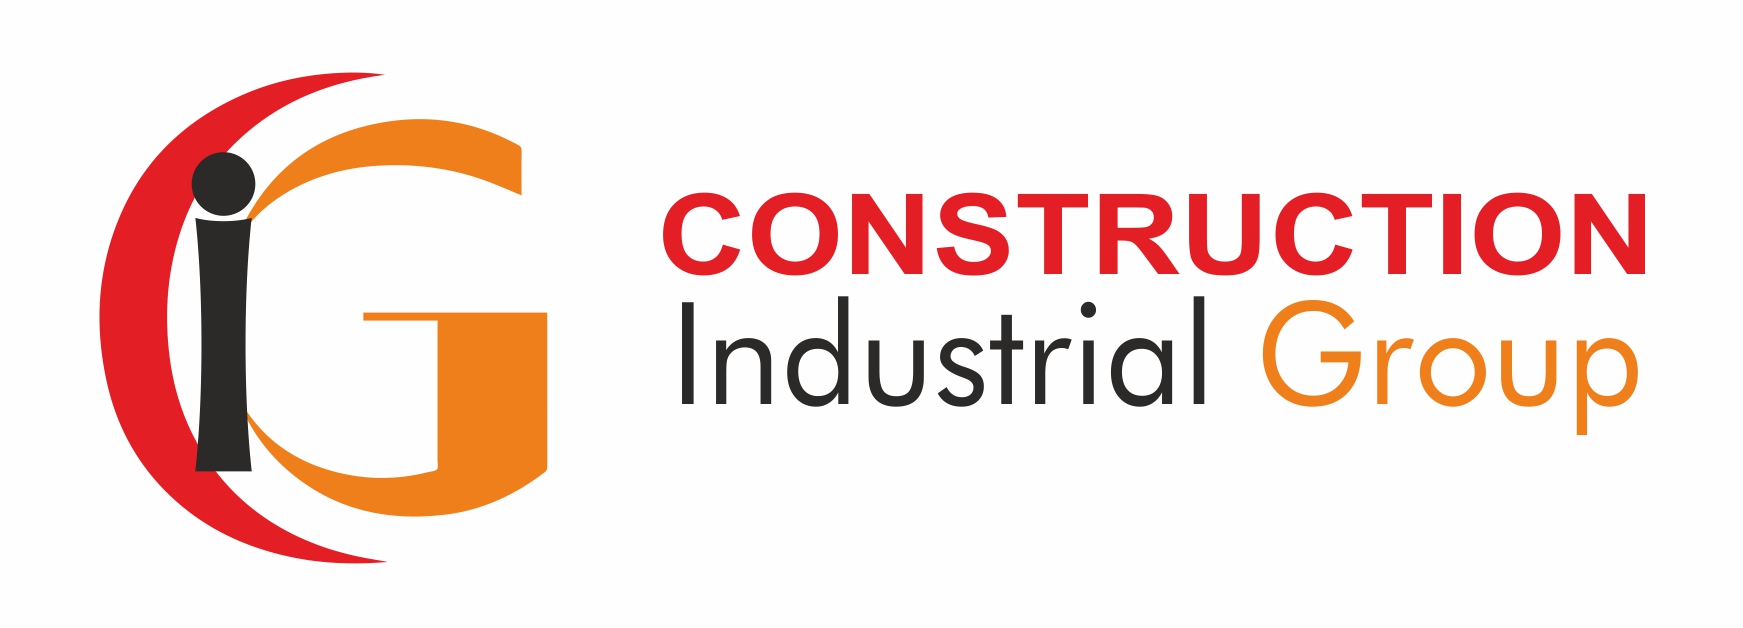 Construction-Industrial Group